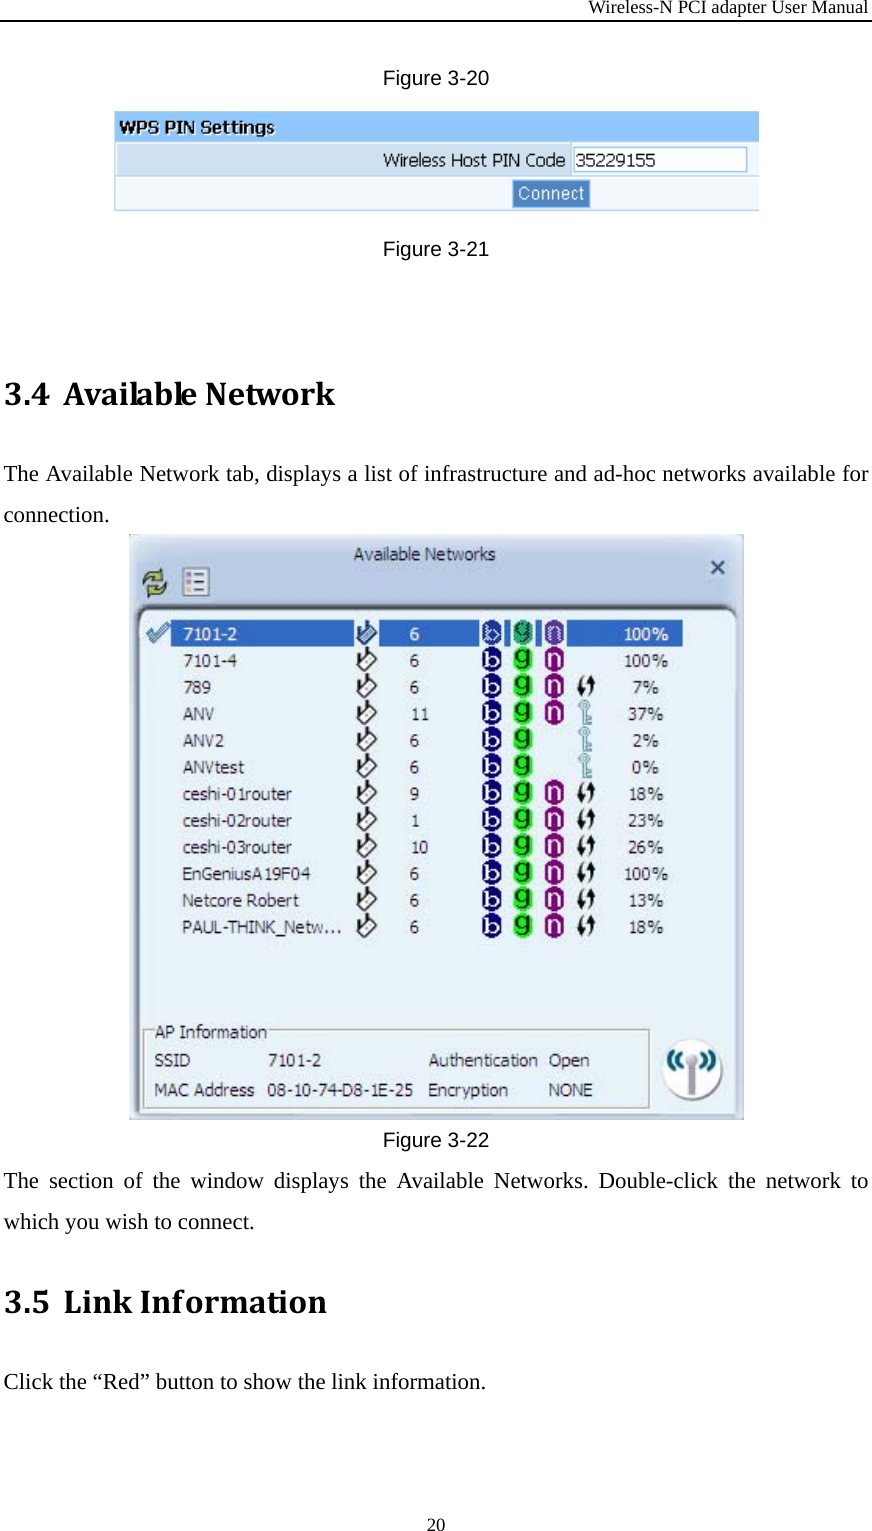 Wireless-N PCI adapter User Manual 20 Figure 3-20 Figure 3-21 3.4 AvailableNetworkThe Available Network tab, displays a list of infrastructure and ad-hoc networks available for connection. Figure 3-22 The section of the window displays the Available Networks. Double-click the network to which you wish to connect. 3.5 LinkInformationClick the “Red” button to show the link information. 